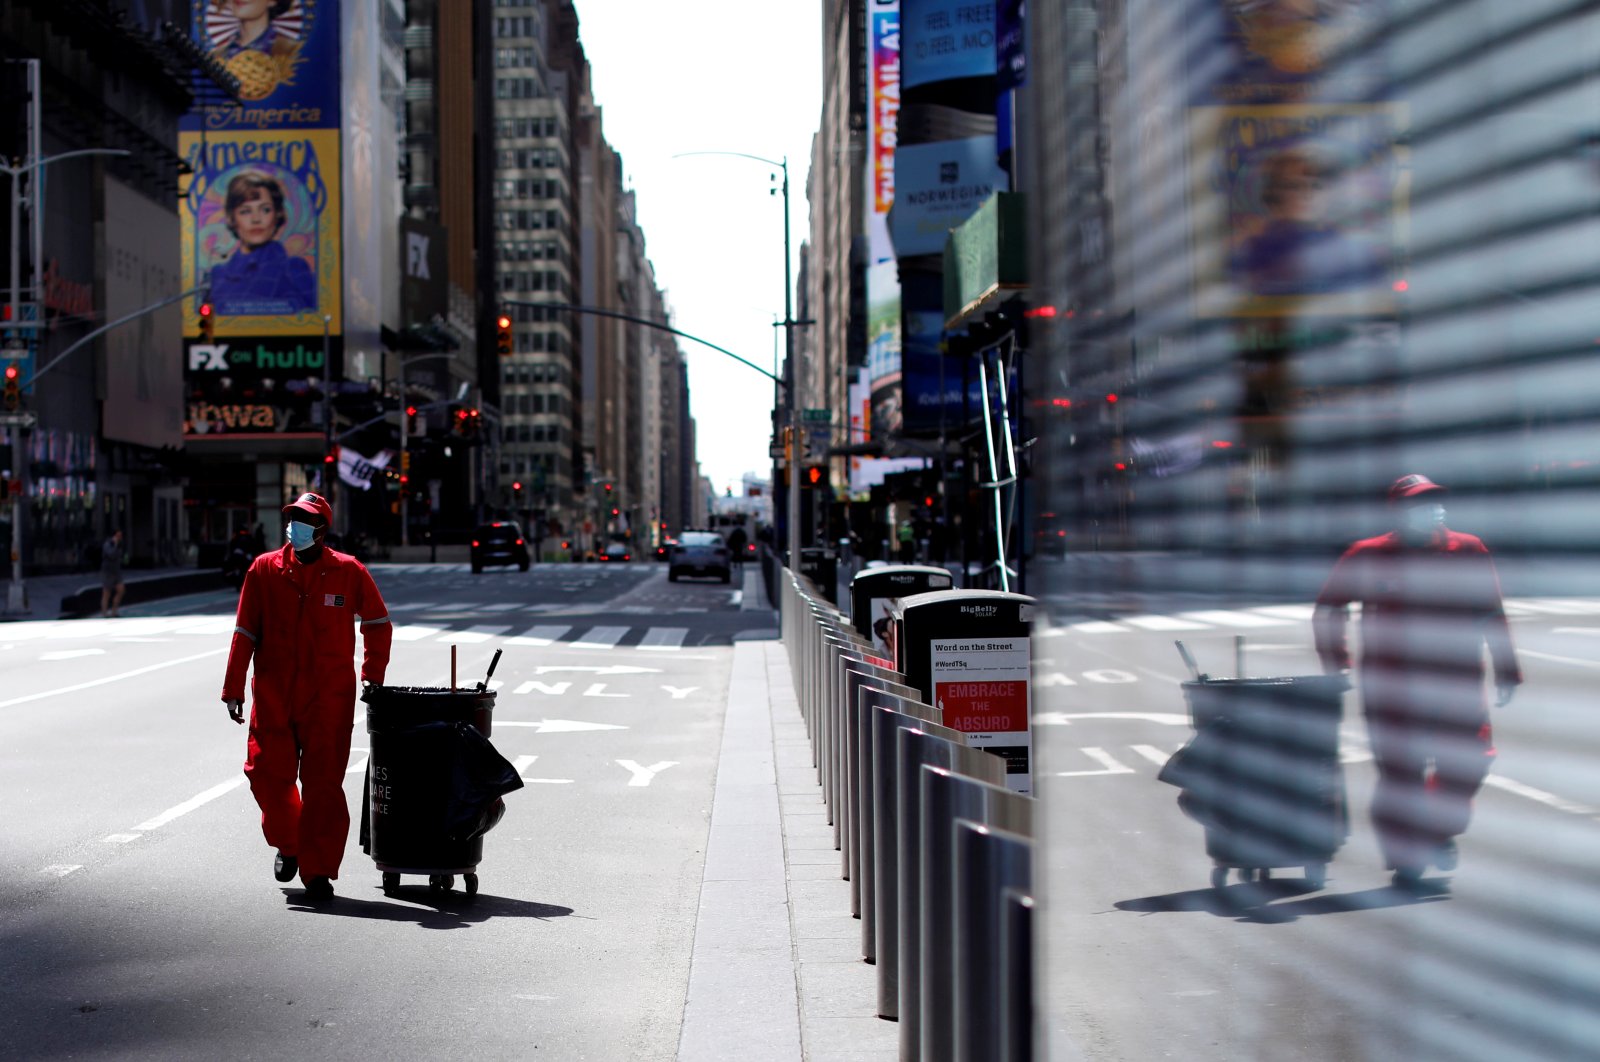 A Times Square Alliance street sweeper walks through a nearly empty Times Square in Manhattan during the outbreak of the coronavirus in New York City, New York, U.S., Tuesday, April 7, 2020. (Reuters Photo)